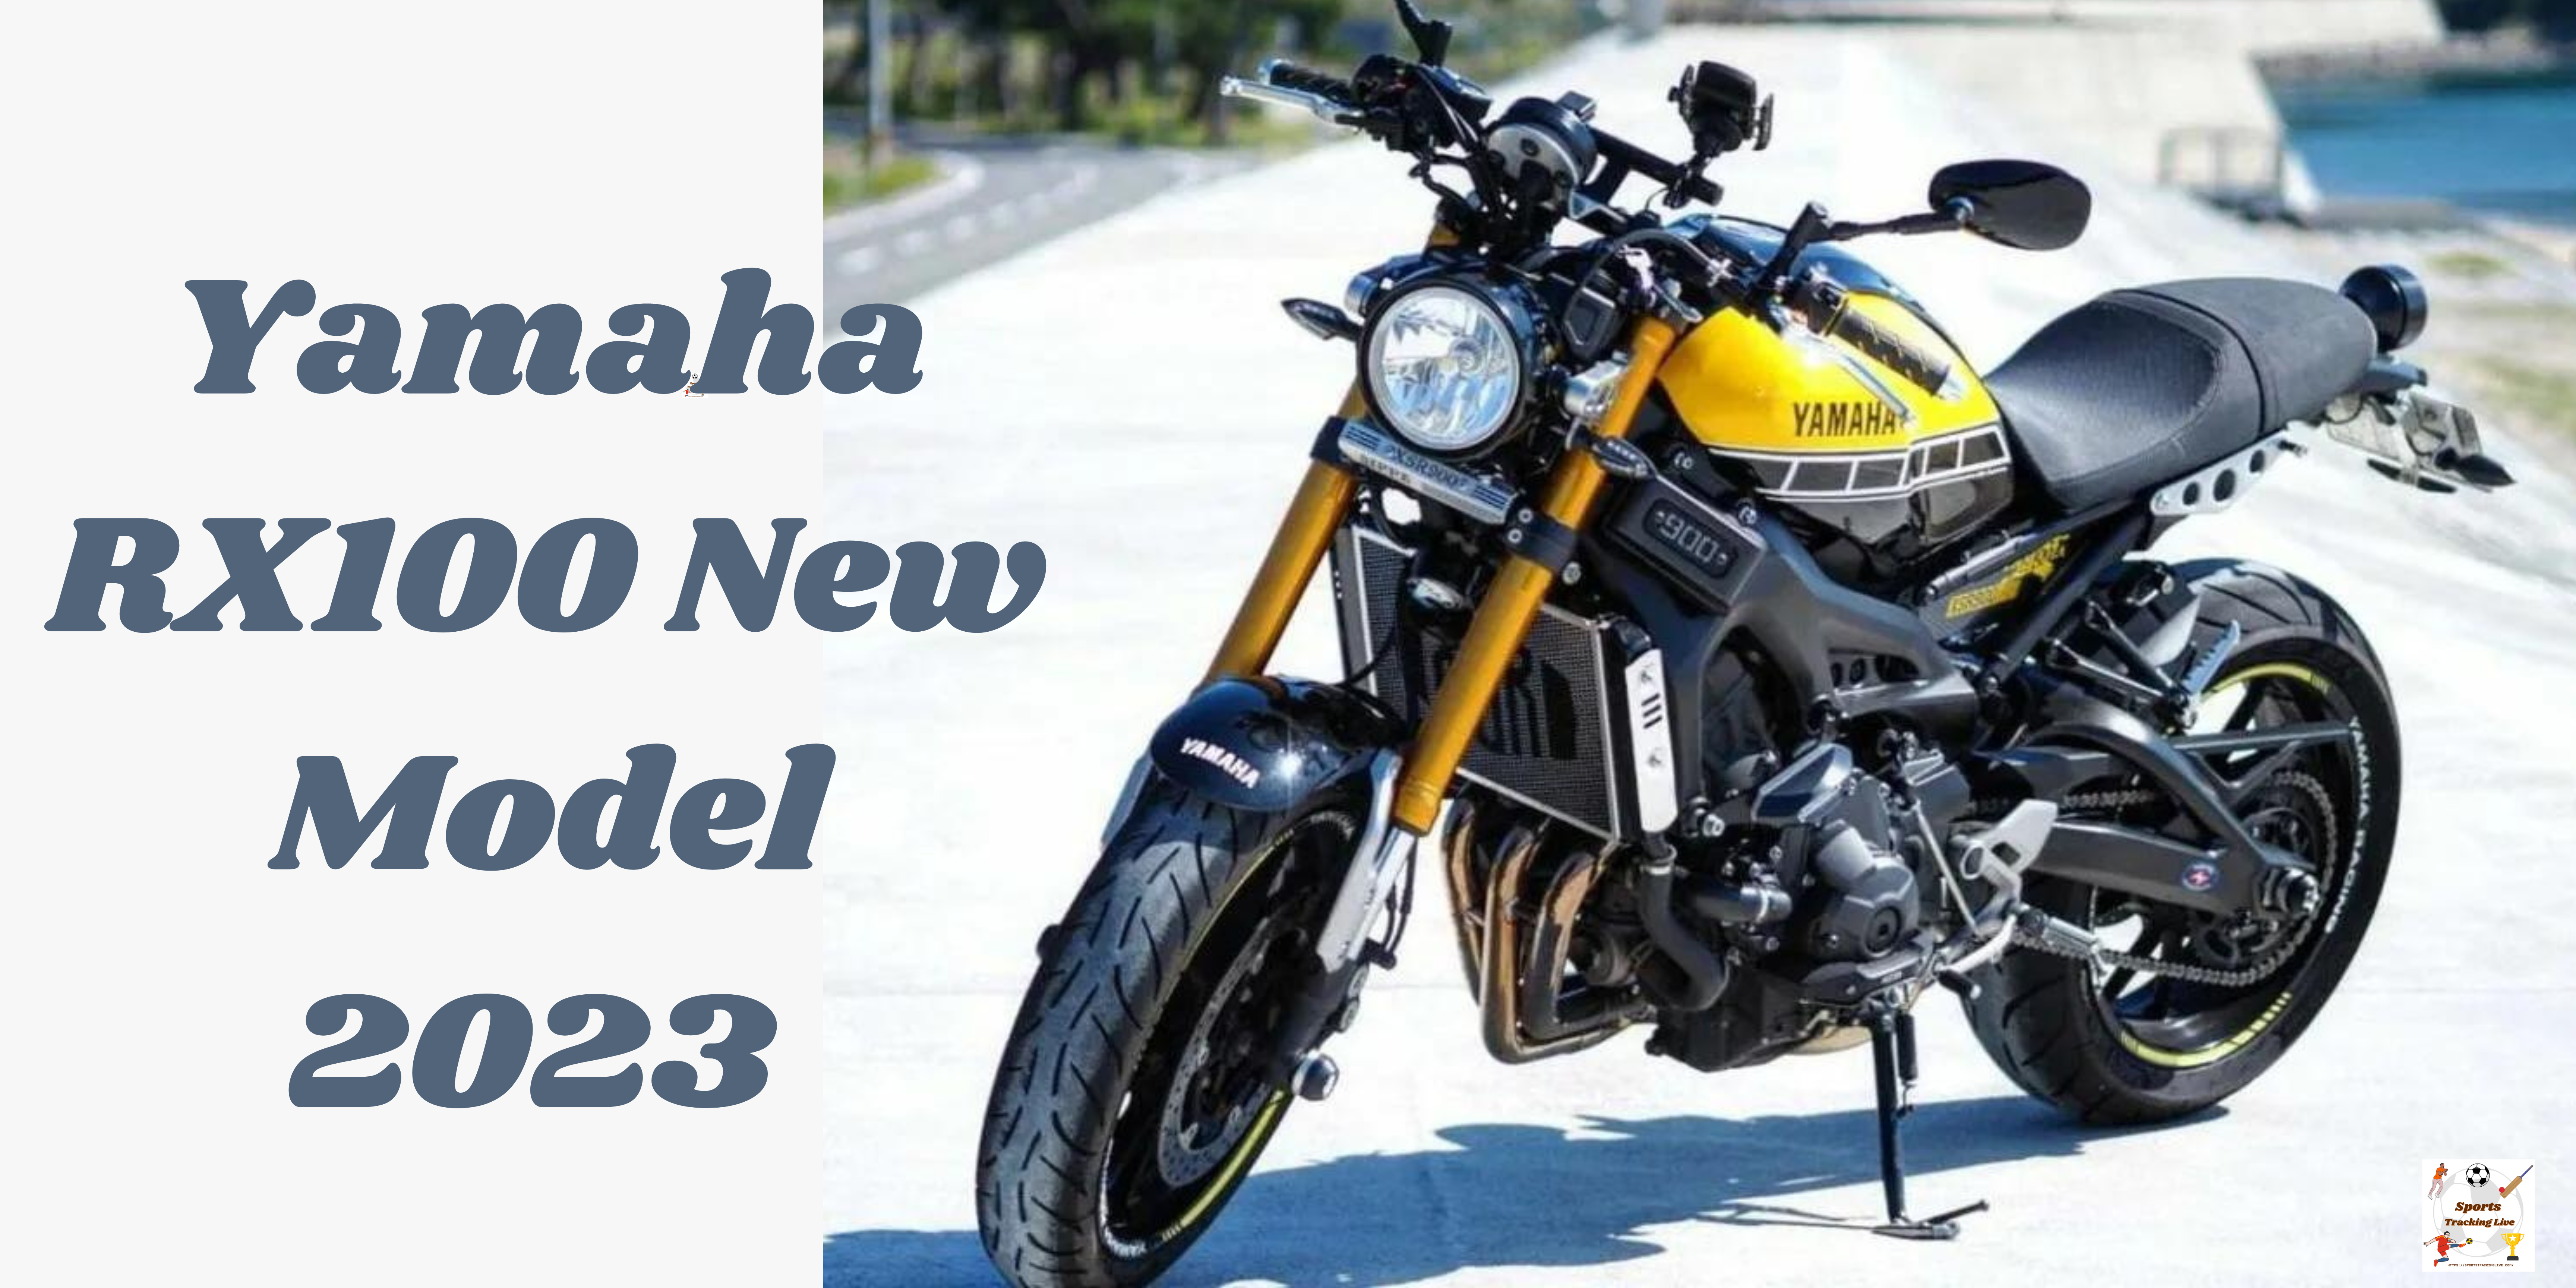 Yamaha RX100 New Model 2023 Price in India – Exciting Details Revealed